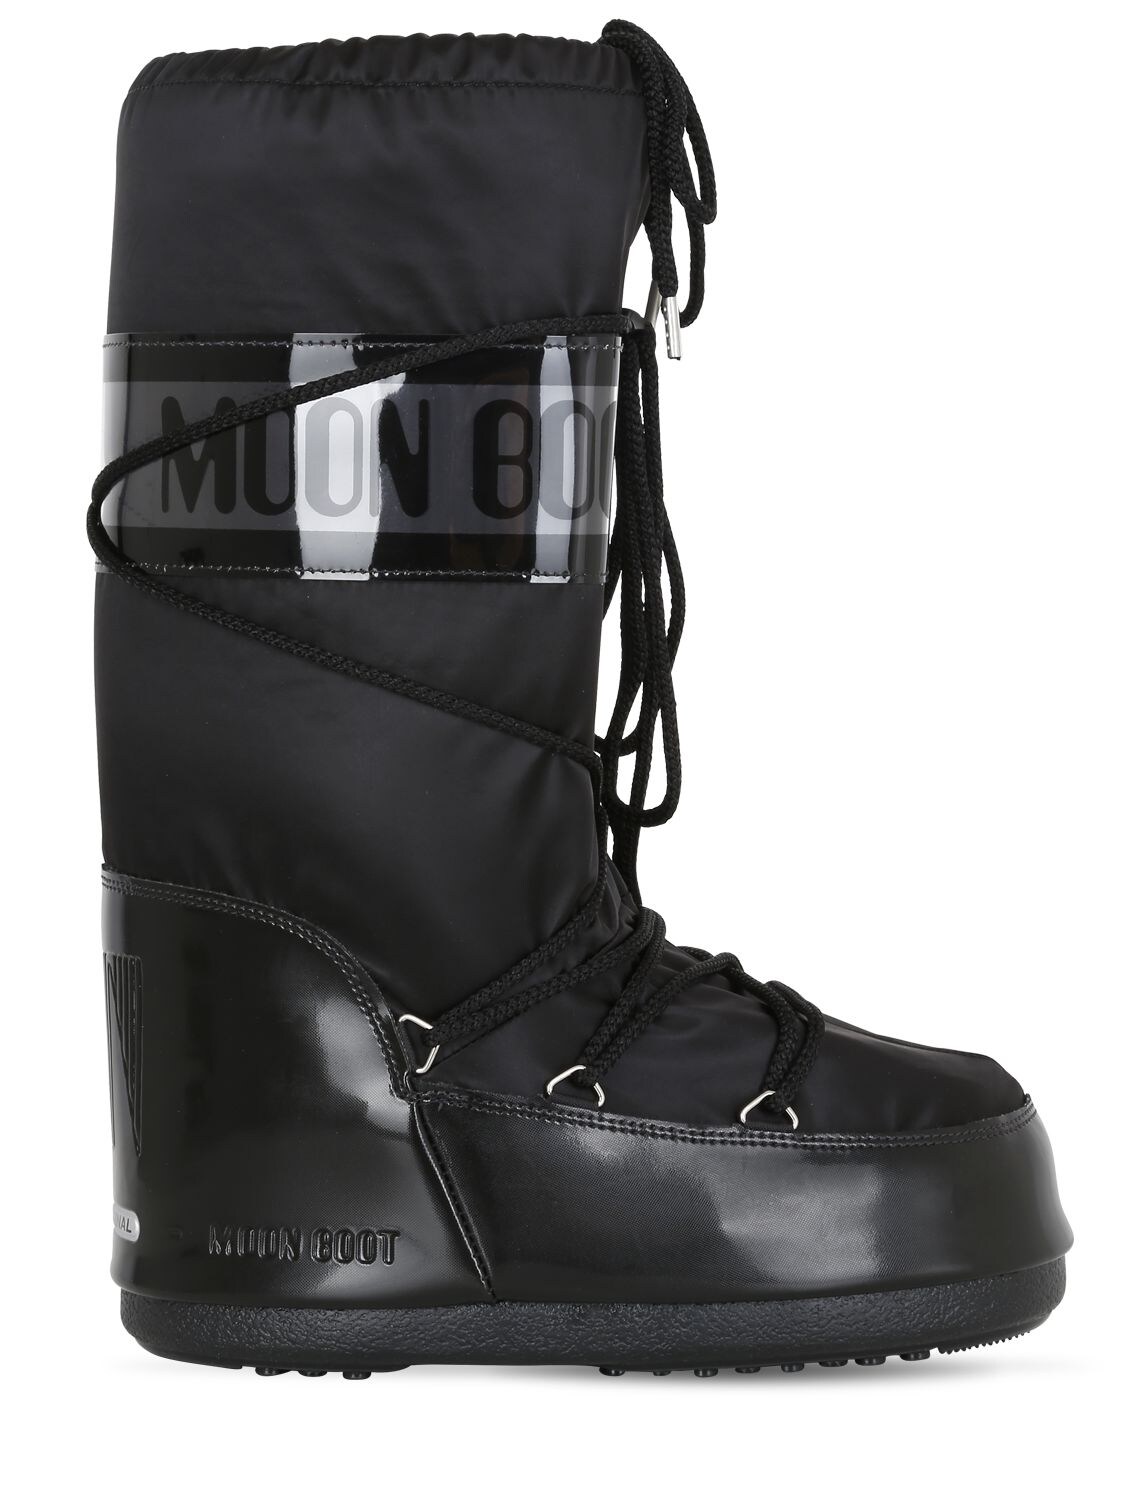 Moon Boot Glance Nylon Boots In Black